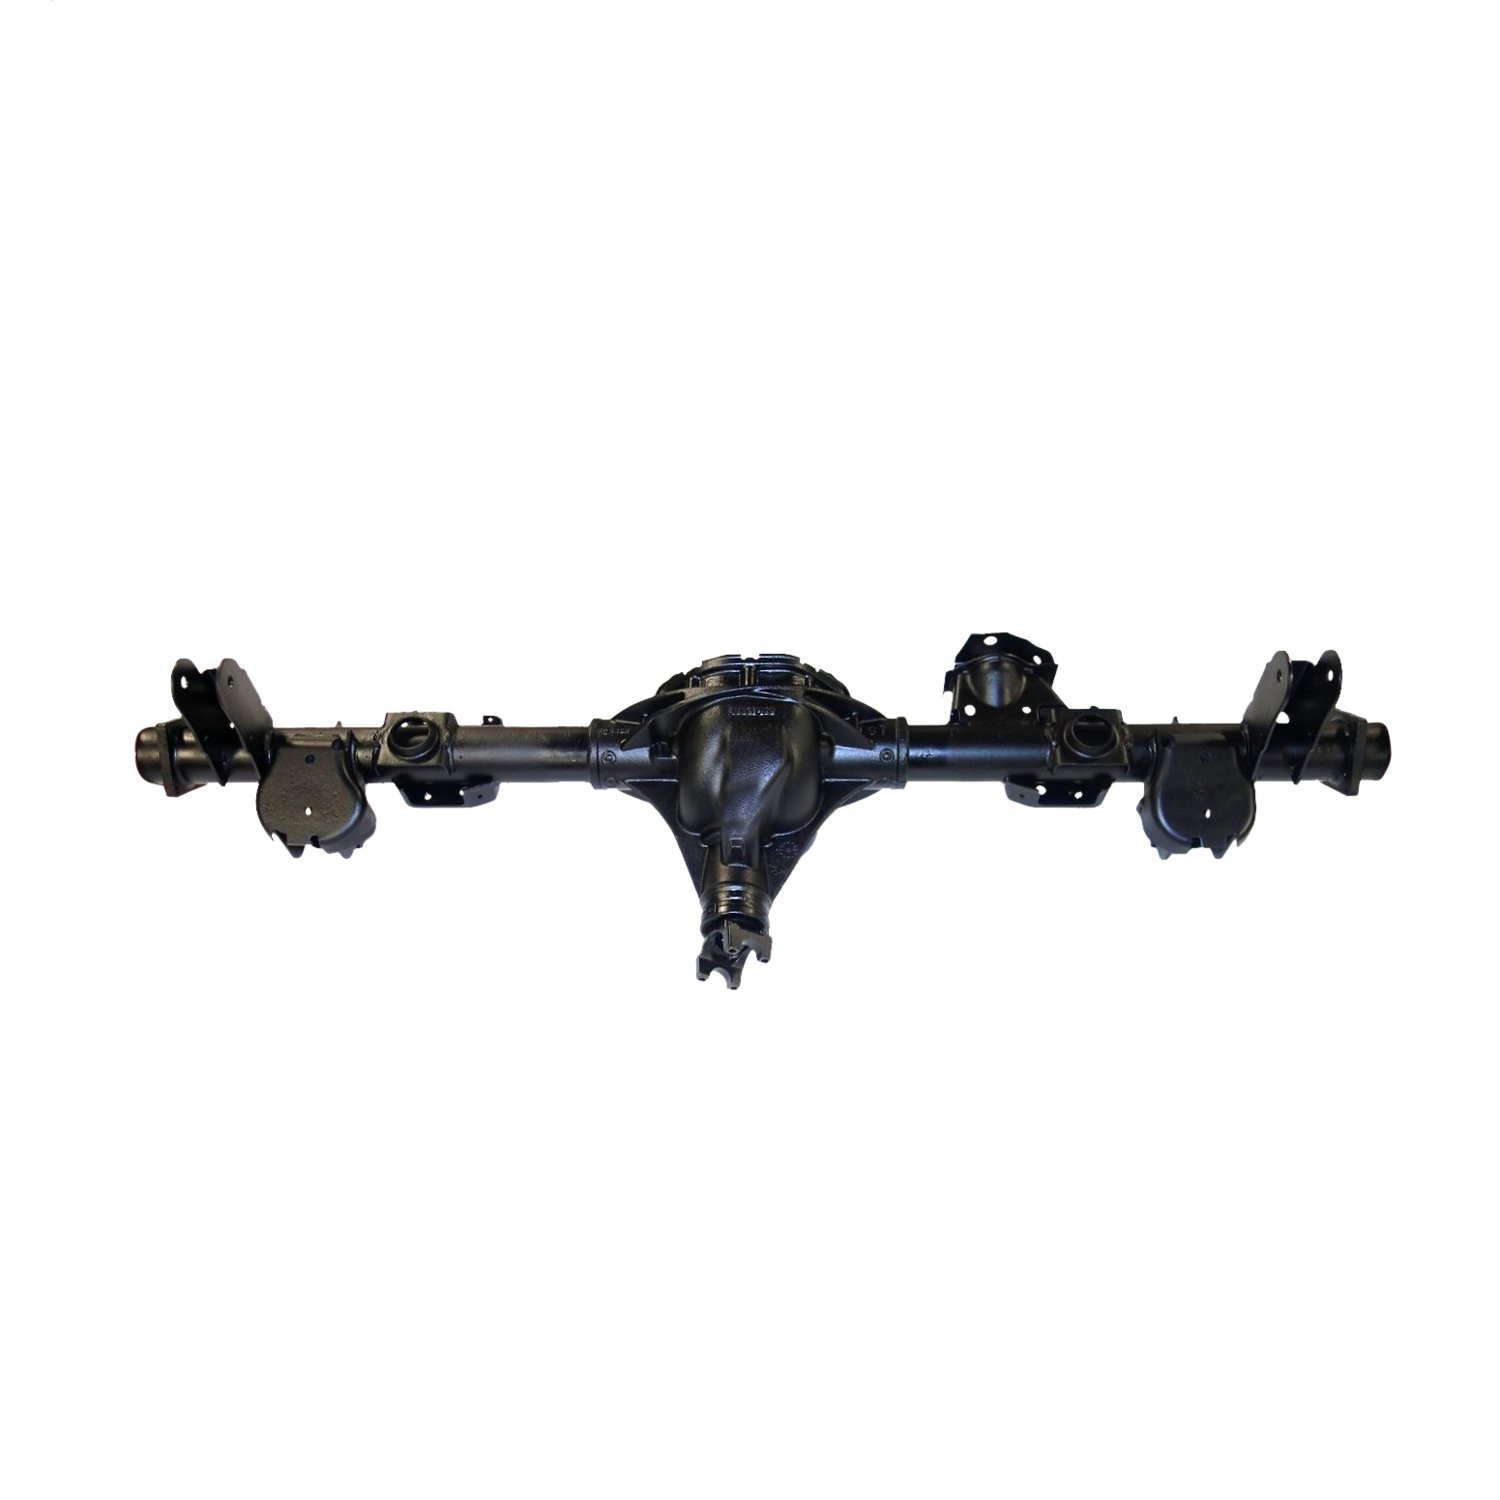 Remanufactured Axle Assembly for GM 8.6" 2007-08 GM Suburban 1500, 3.42 Rato, Posi